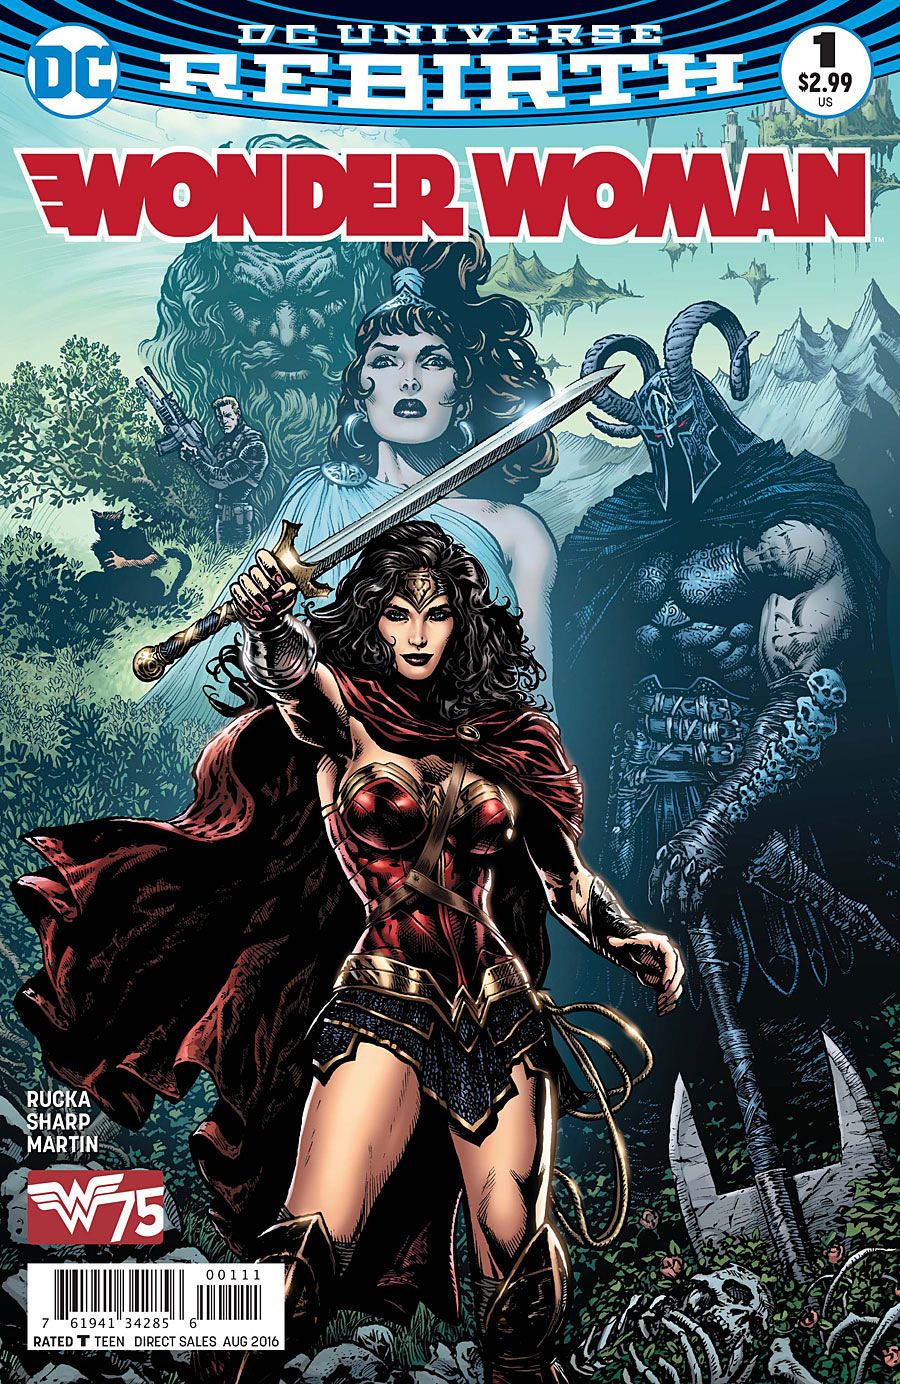 Wonder Woman #1 cover by Liam Sharp.